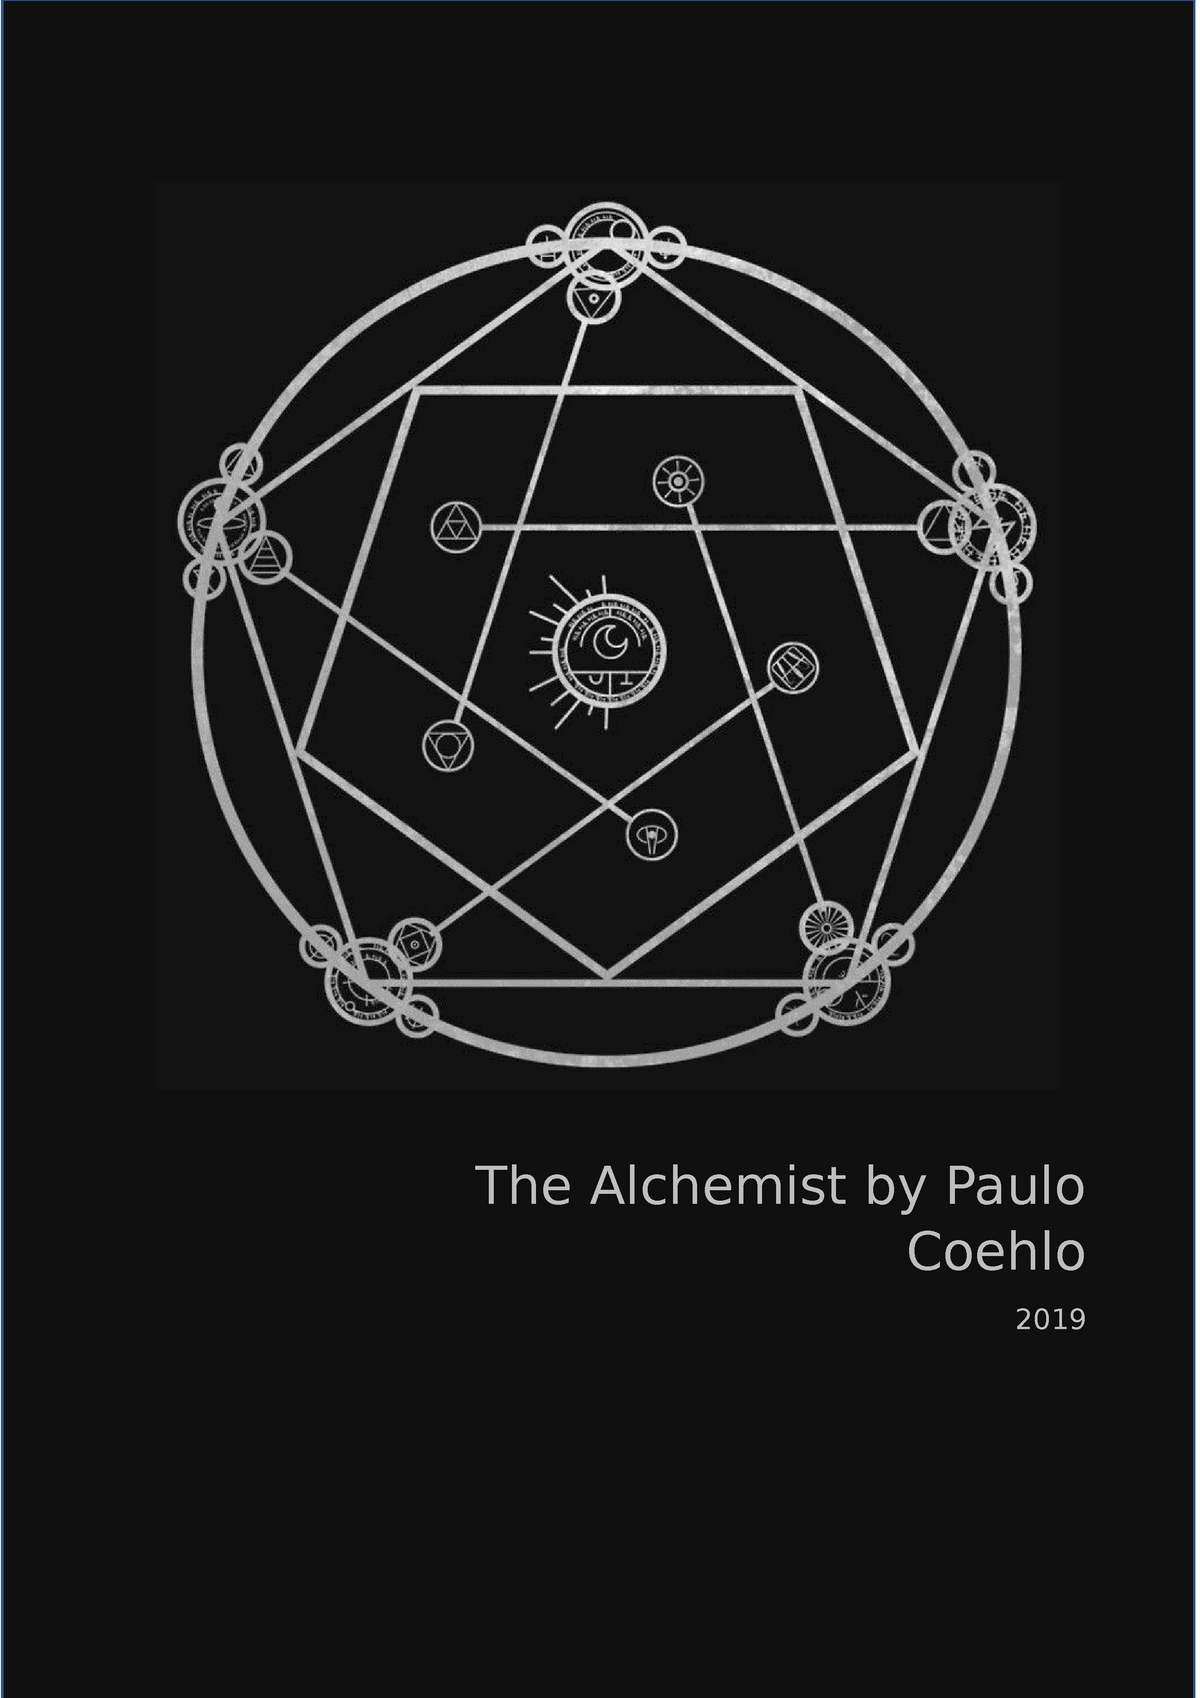 the alchemist assignment 2